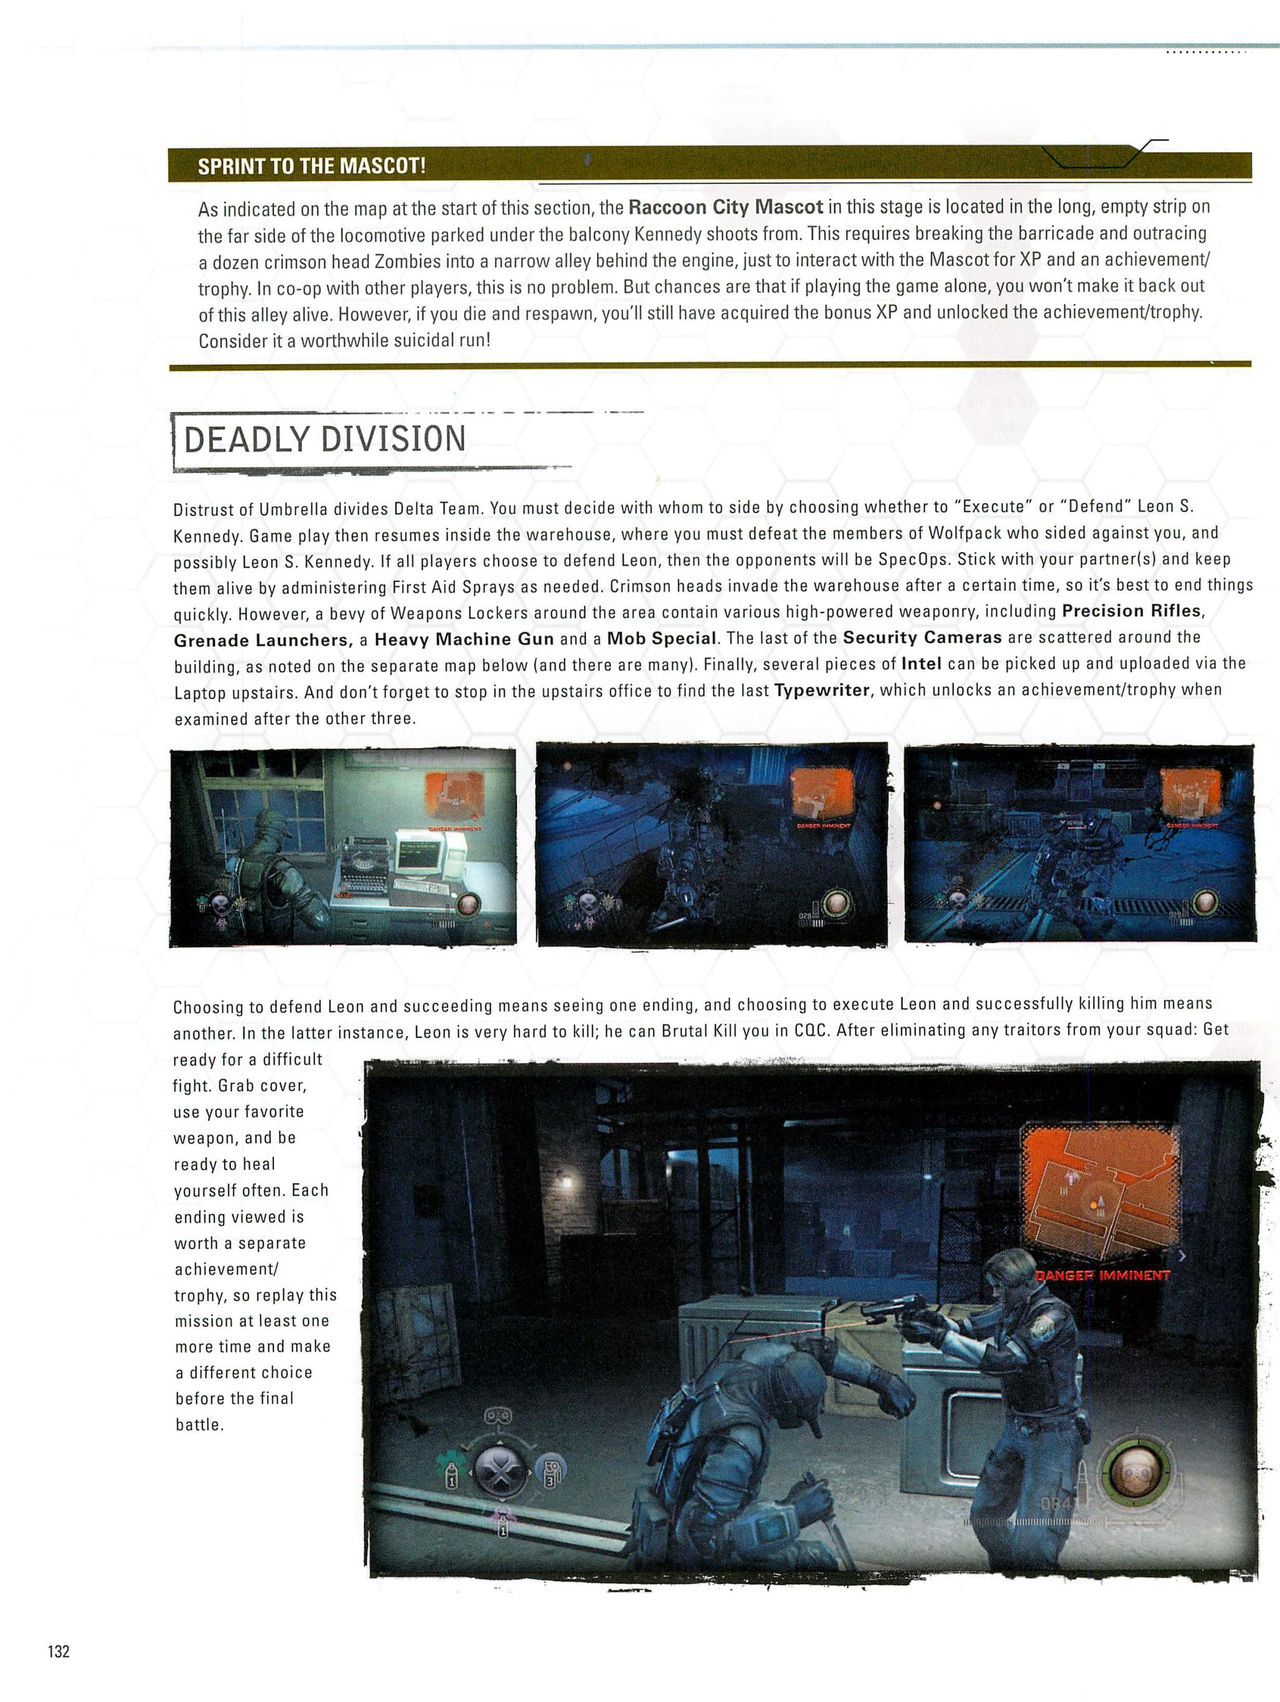 Resident Evil: Operation Raccoon City Official Strategy Guide (watermarked) 134